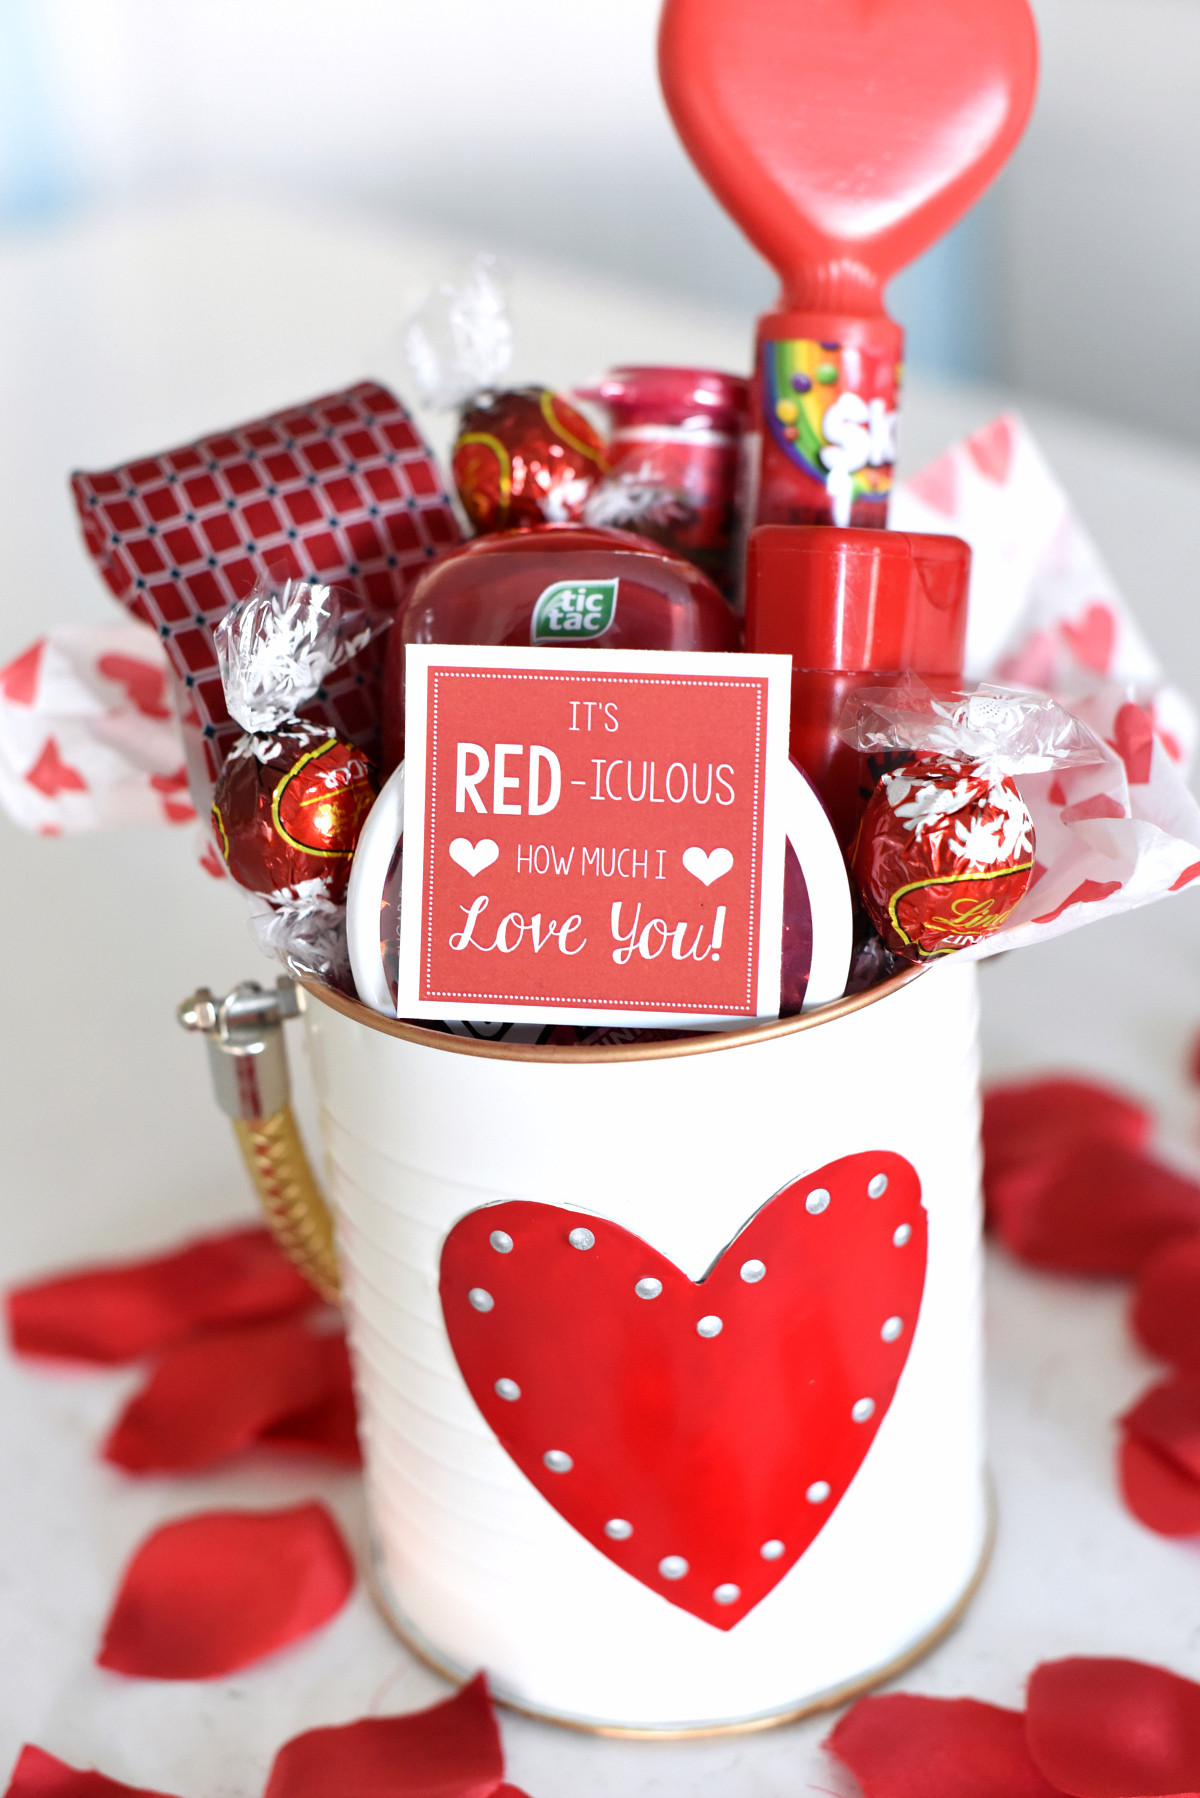 Valentine Gift Ideas To Make For Him
 Cute Valentine s Day Gift Idea RED iculous Basket